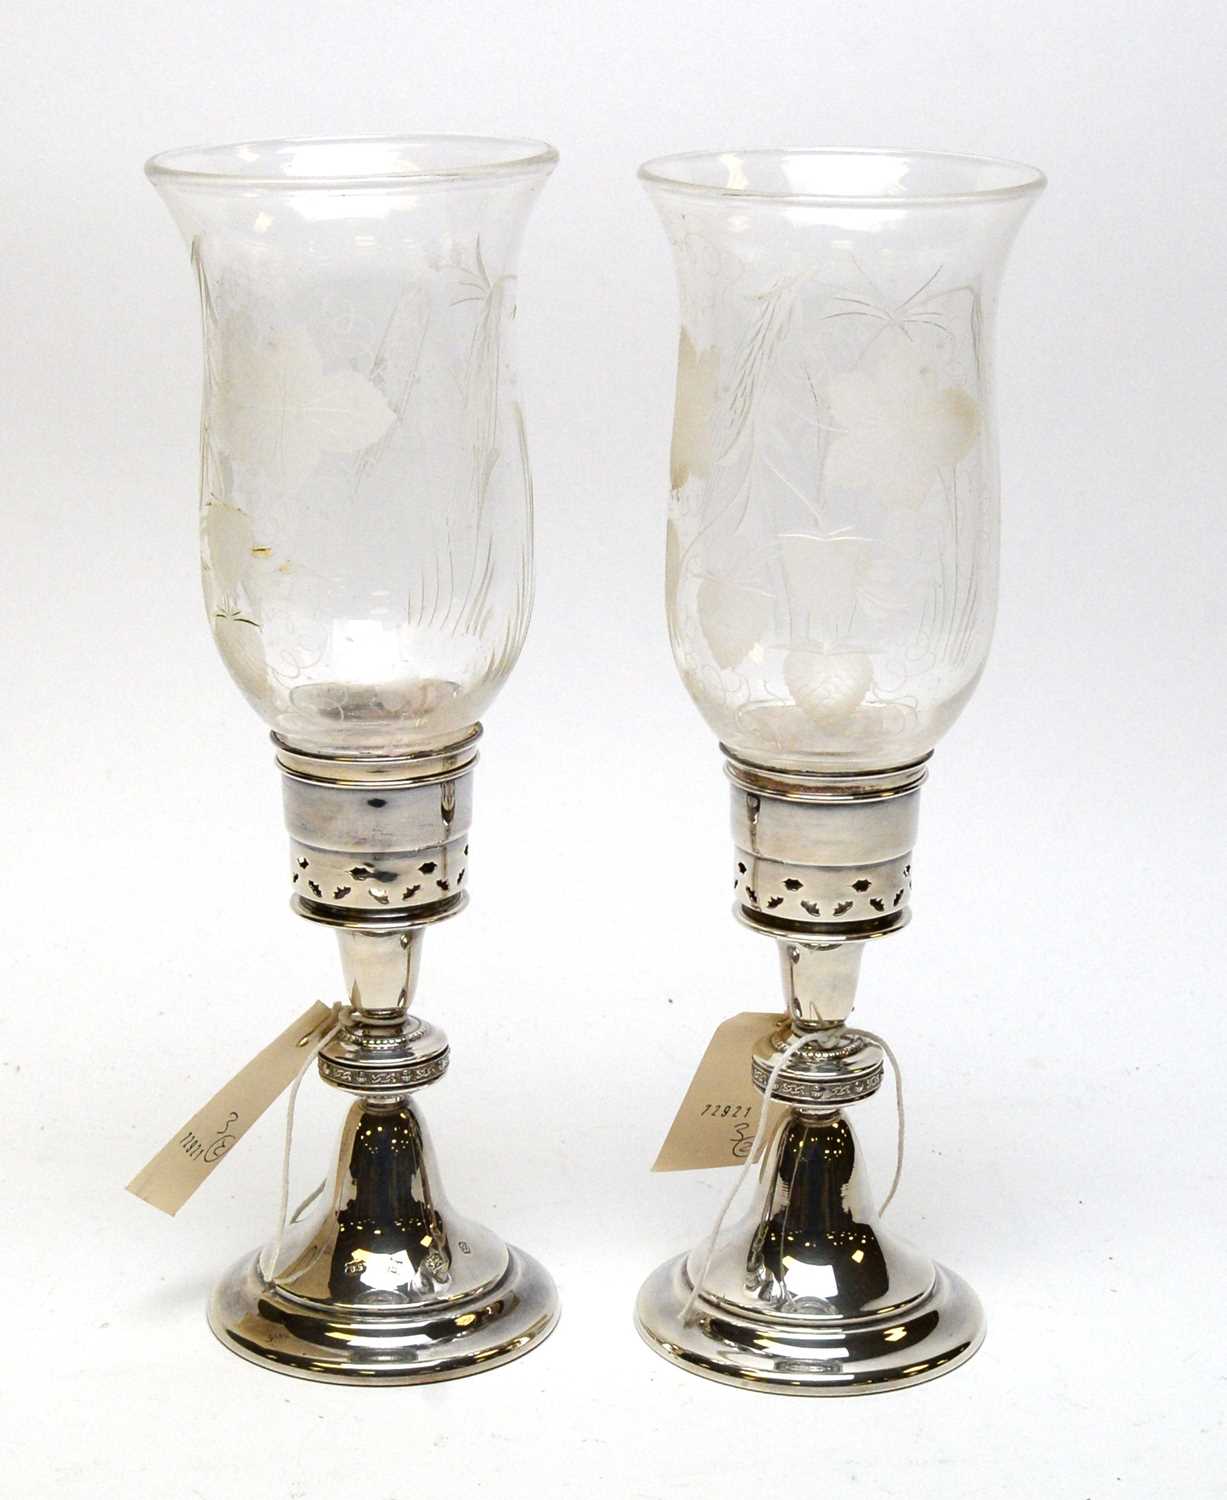 Lot 195 - A pair of silver and etched glass hurricane candlesticks.